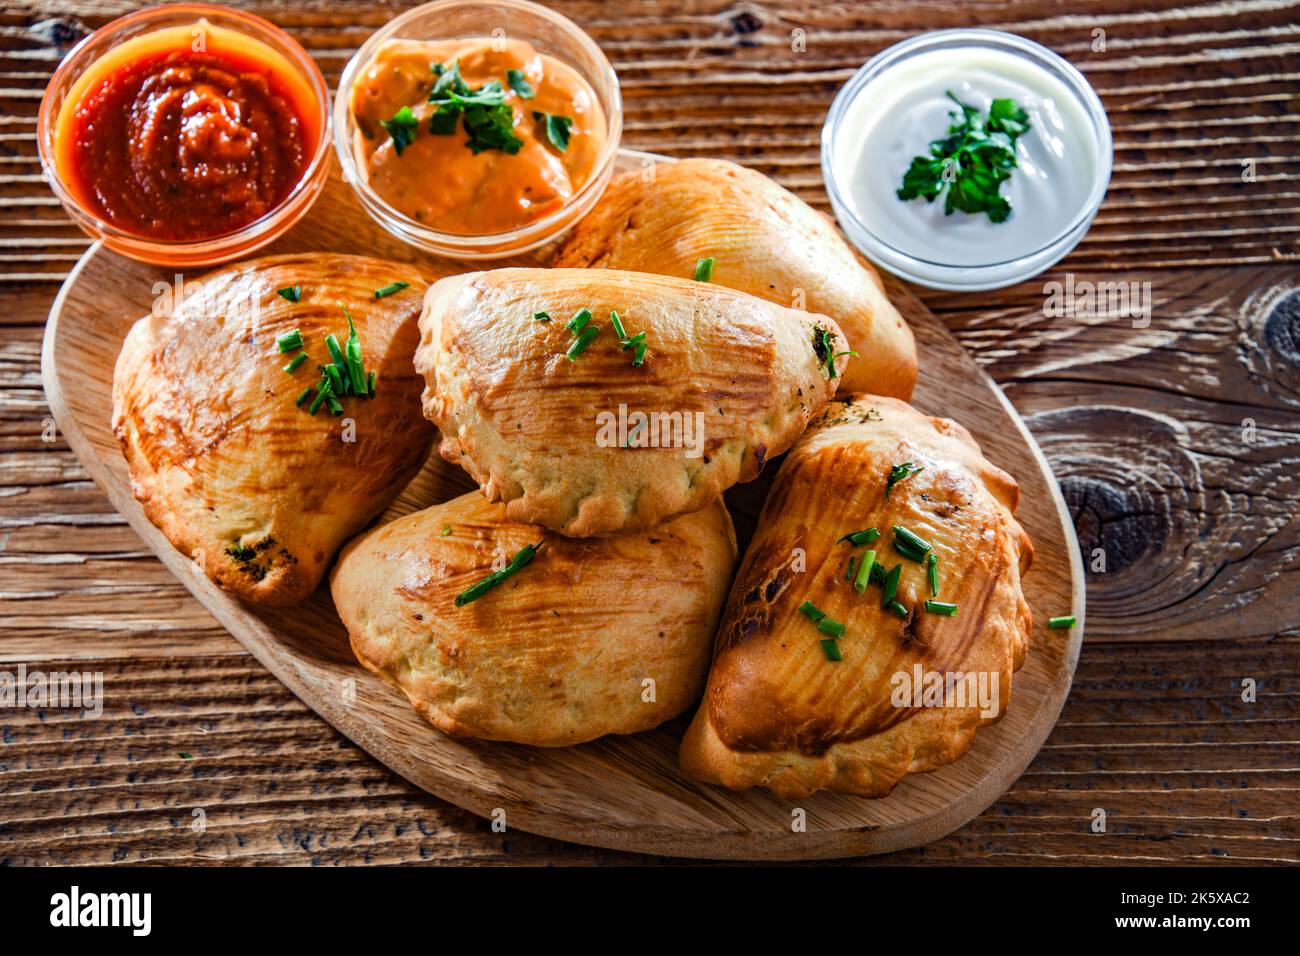 Composition with a dish of oven-baked pierogi Stock Photo